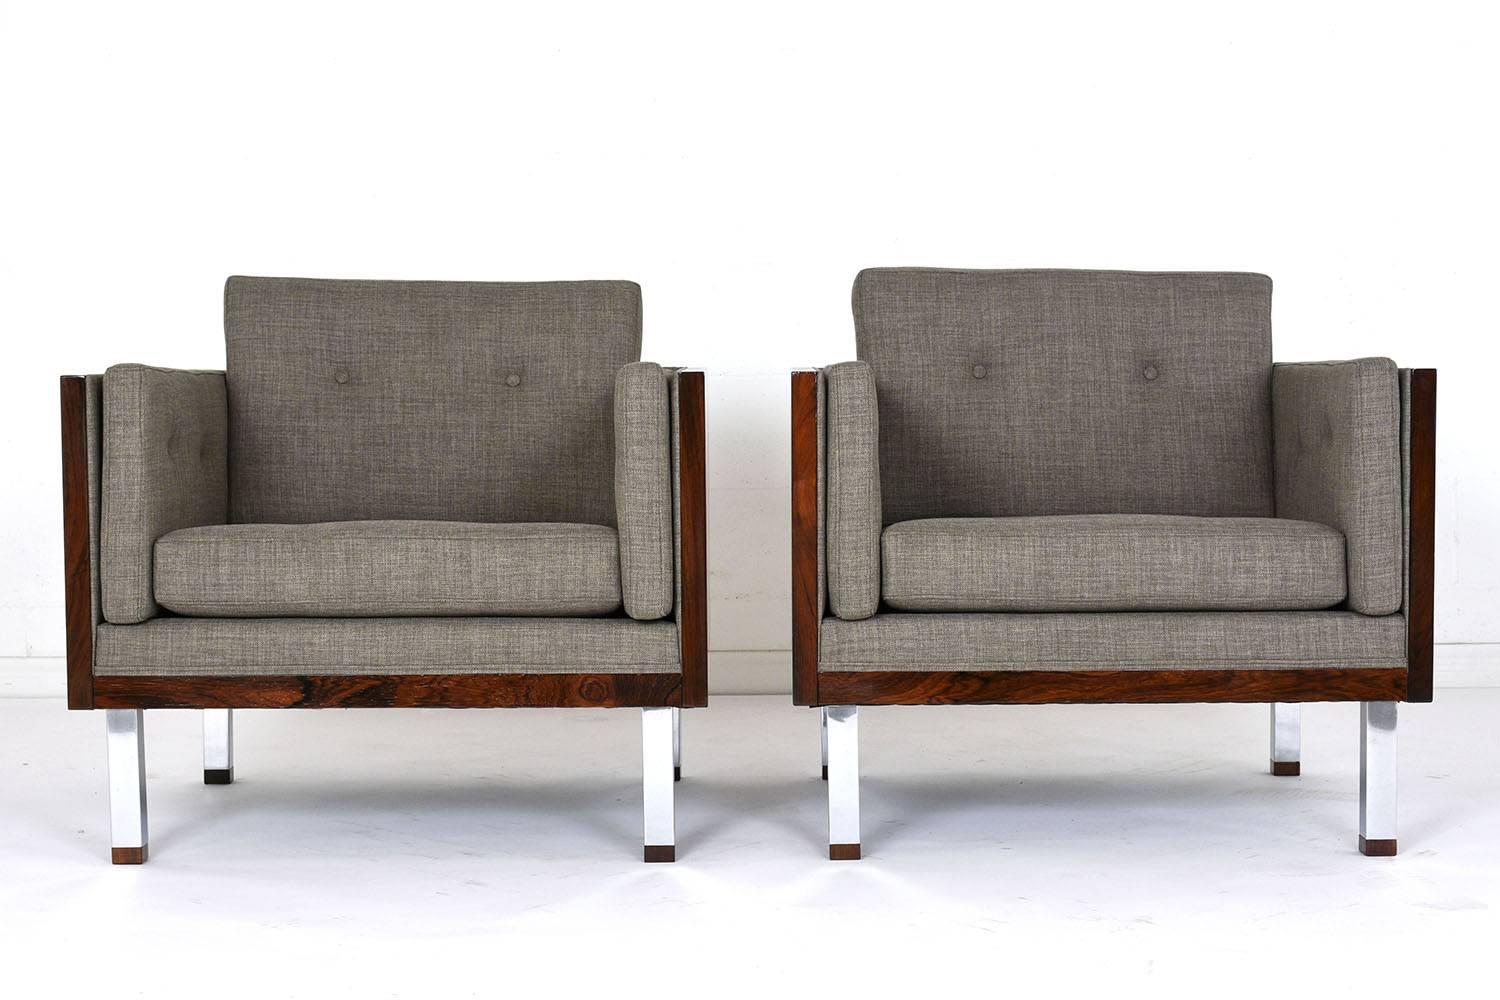 This pair of 1960s Mid-Century Modern-style lounge chairs are designed by Jydsk Mobelvaerk. The cube shape is accented by a rosewood case frame in a rich rosewood color stain and a lacquered finish. The seat has recently been professionally